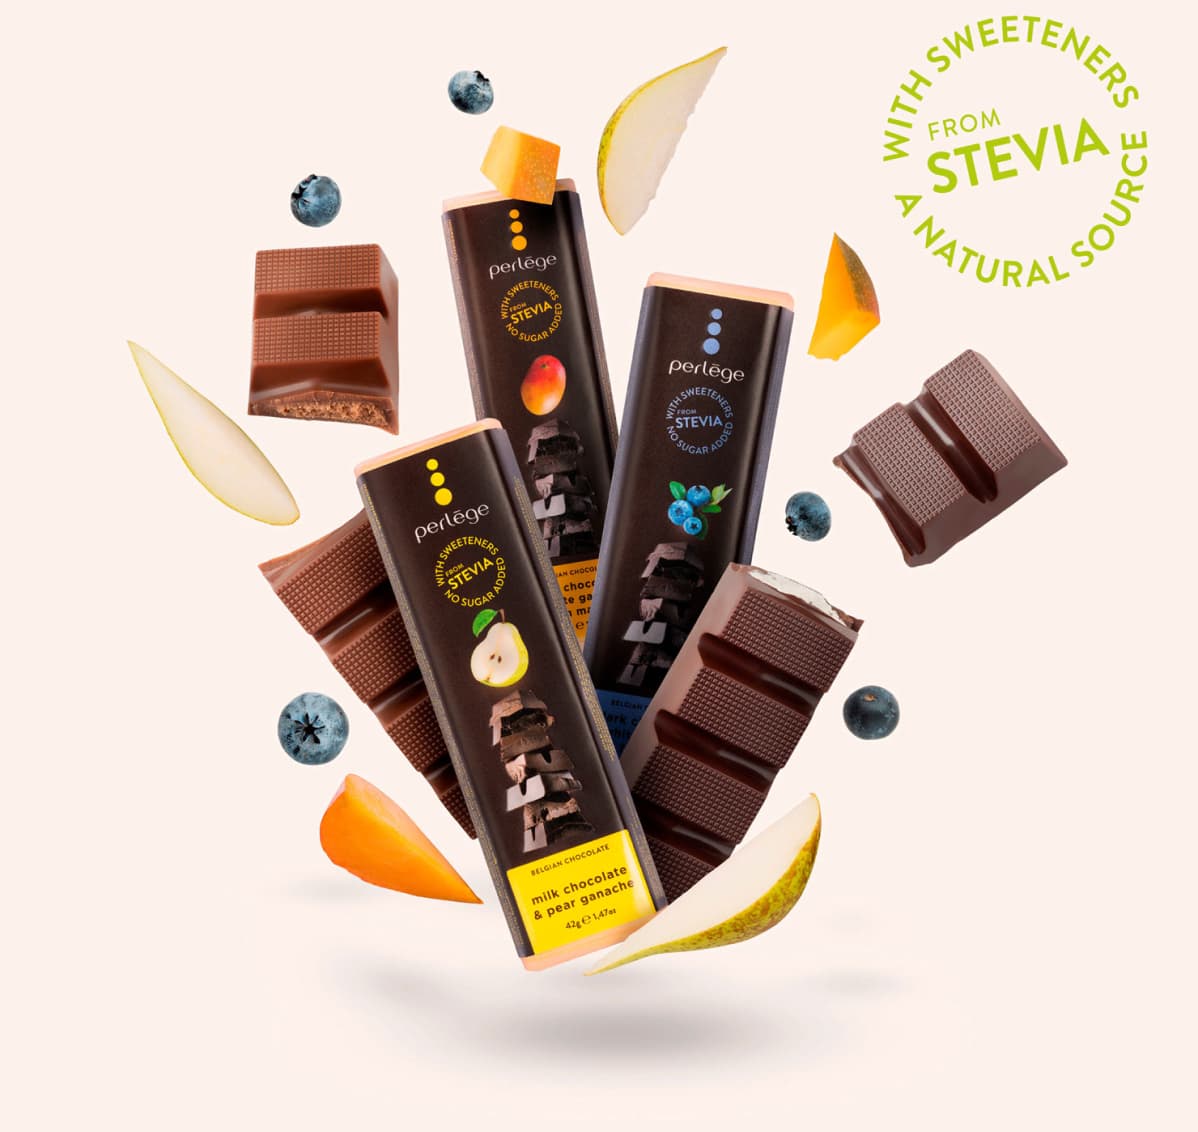 An assortment of Perlège chocolate bars made with Stevia